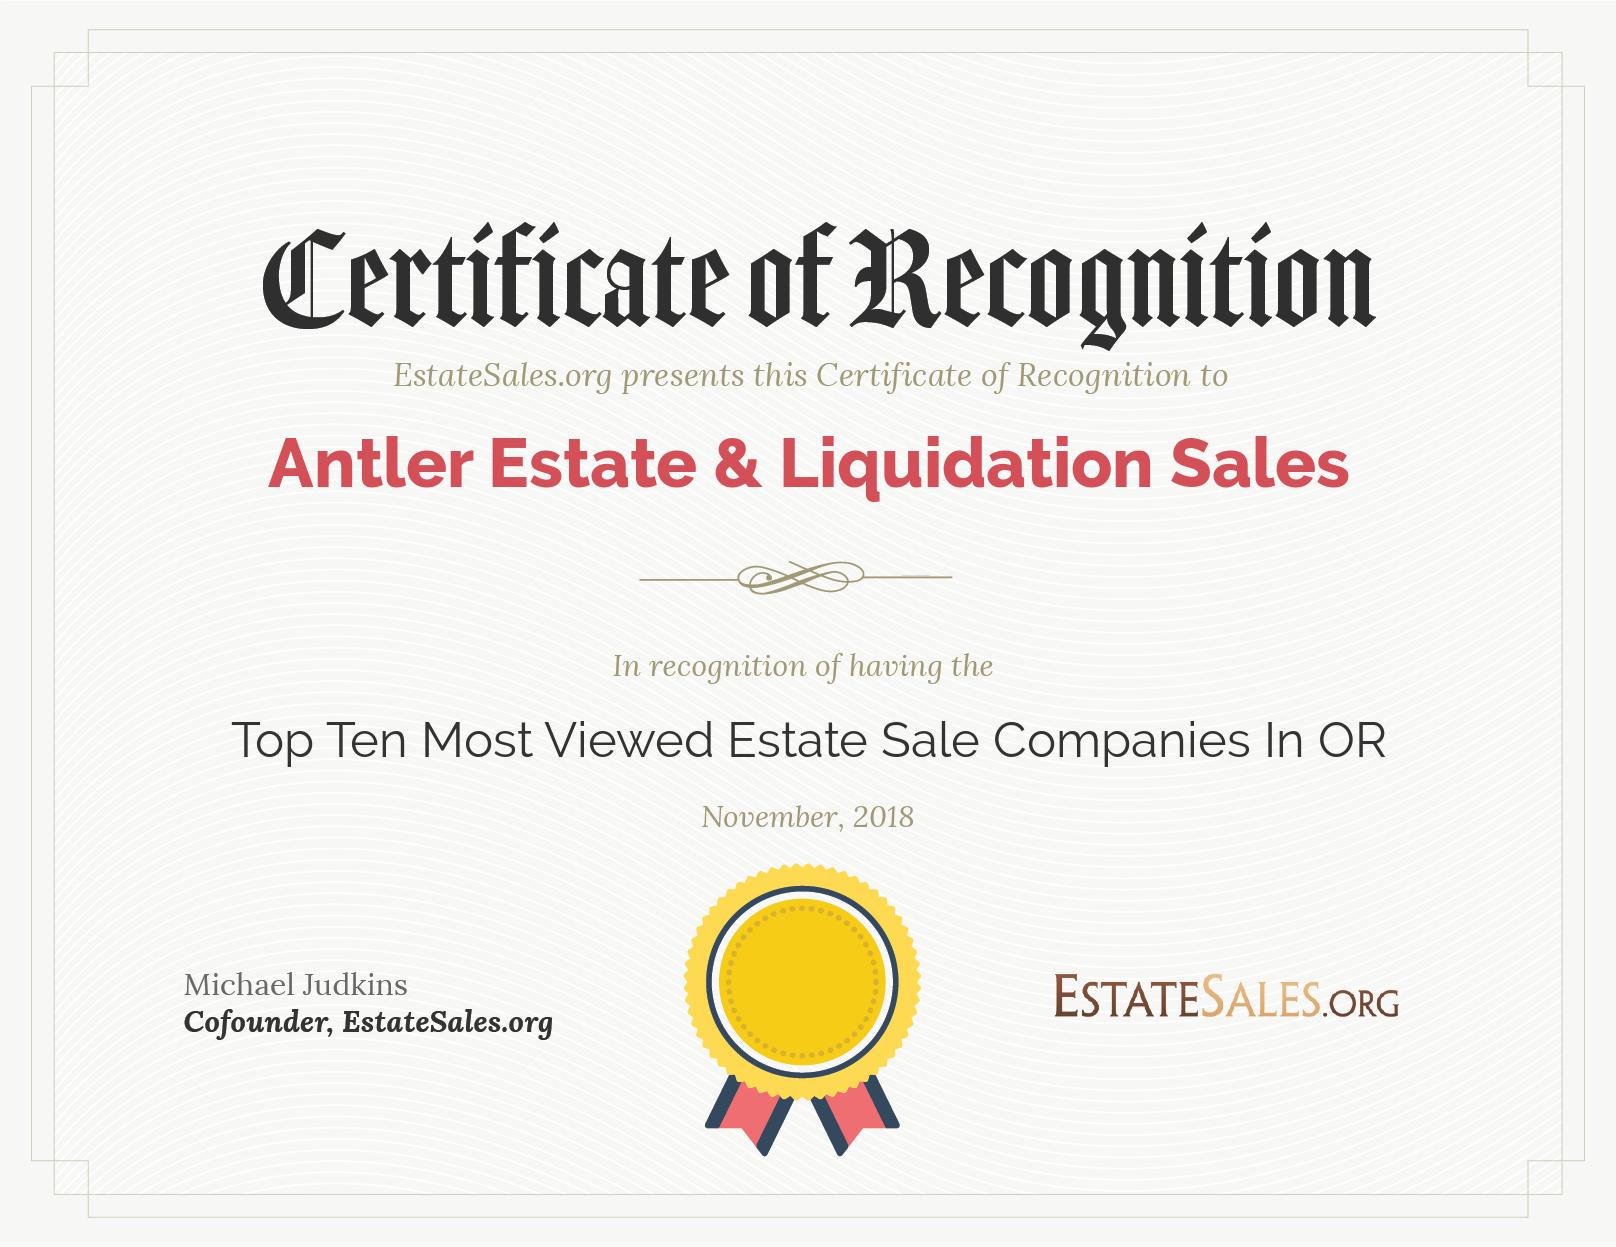 Most Viewed Estate Sale Company Award